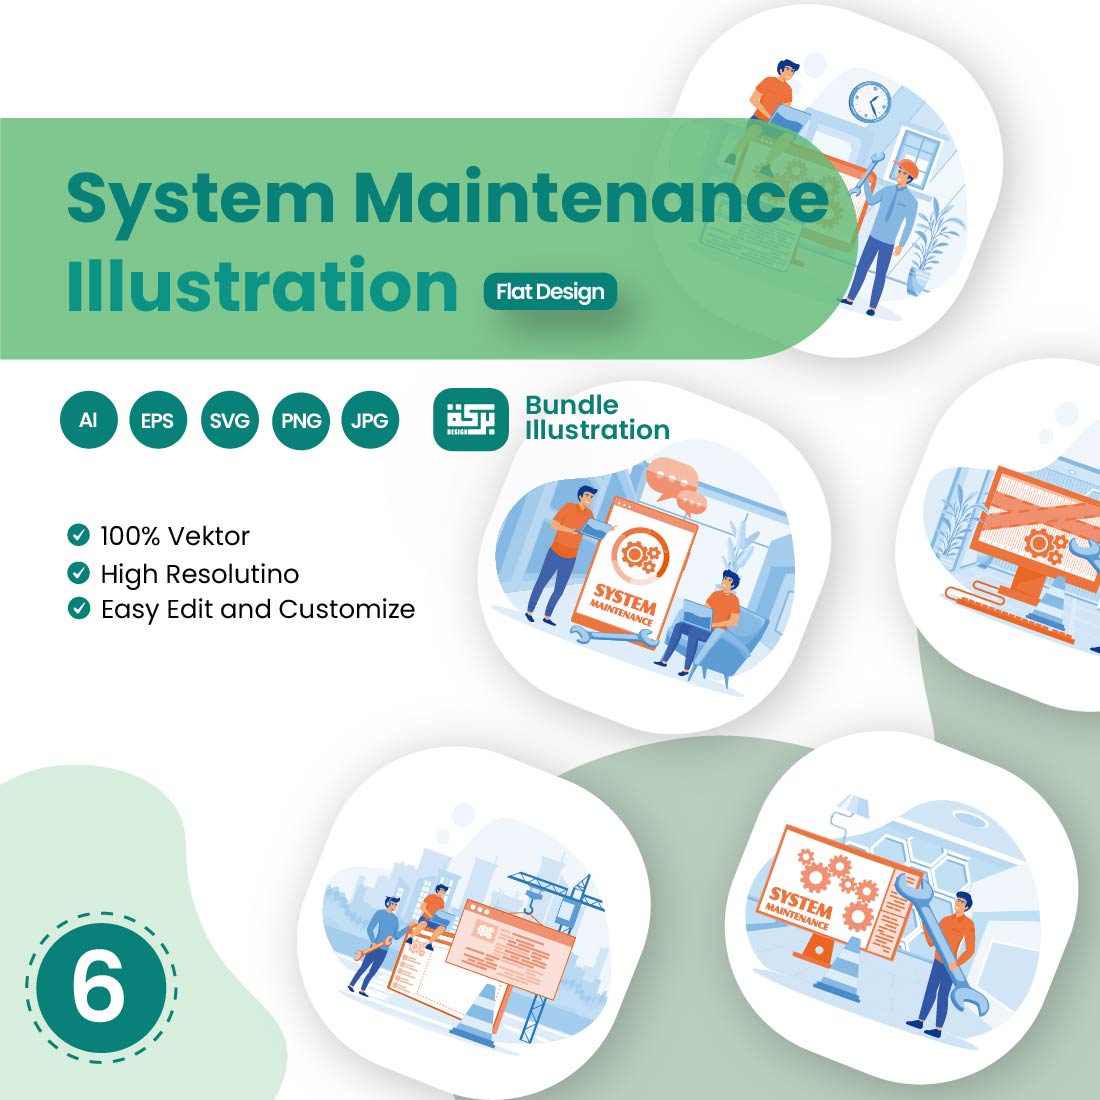 Illustration Design for the Use of System Maintenance cover image.